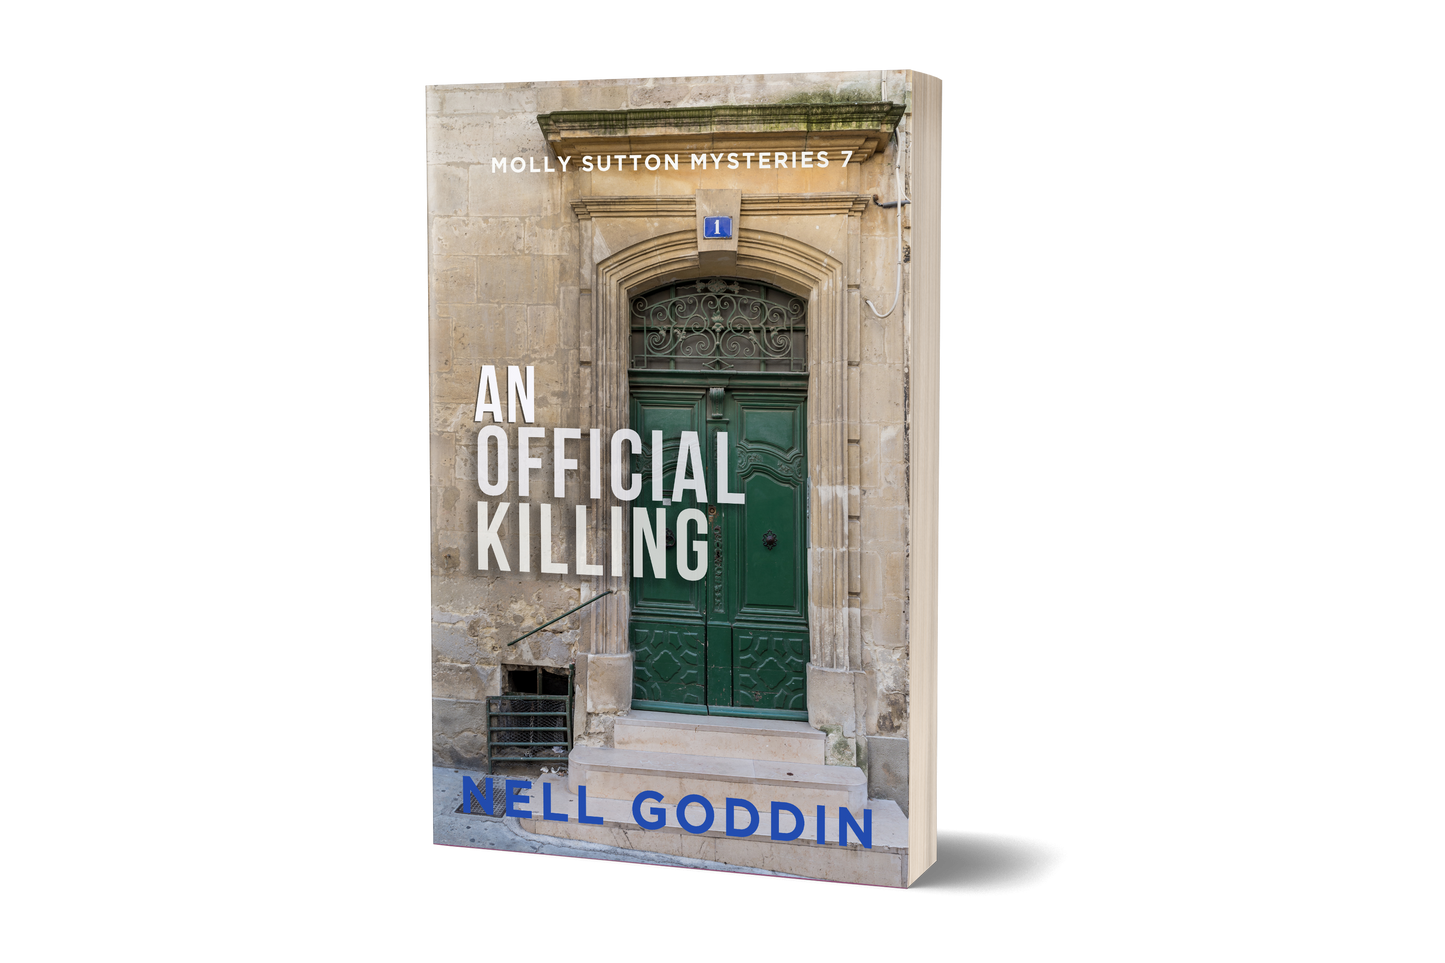 An Official Killing (Molly Sutton Mysteries 7): Paperback